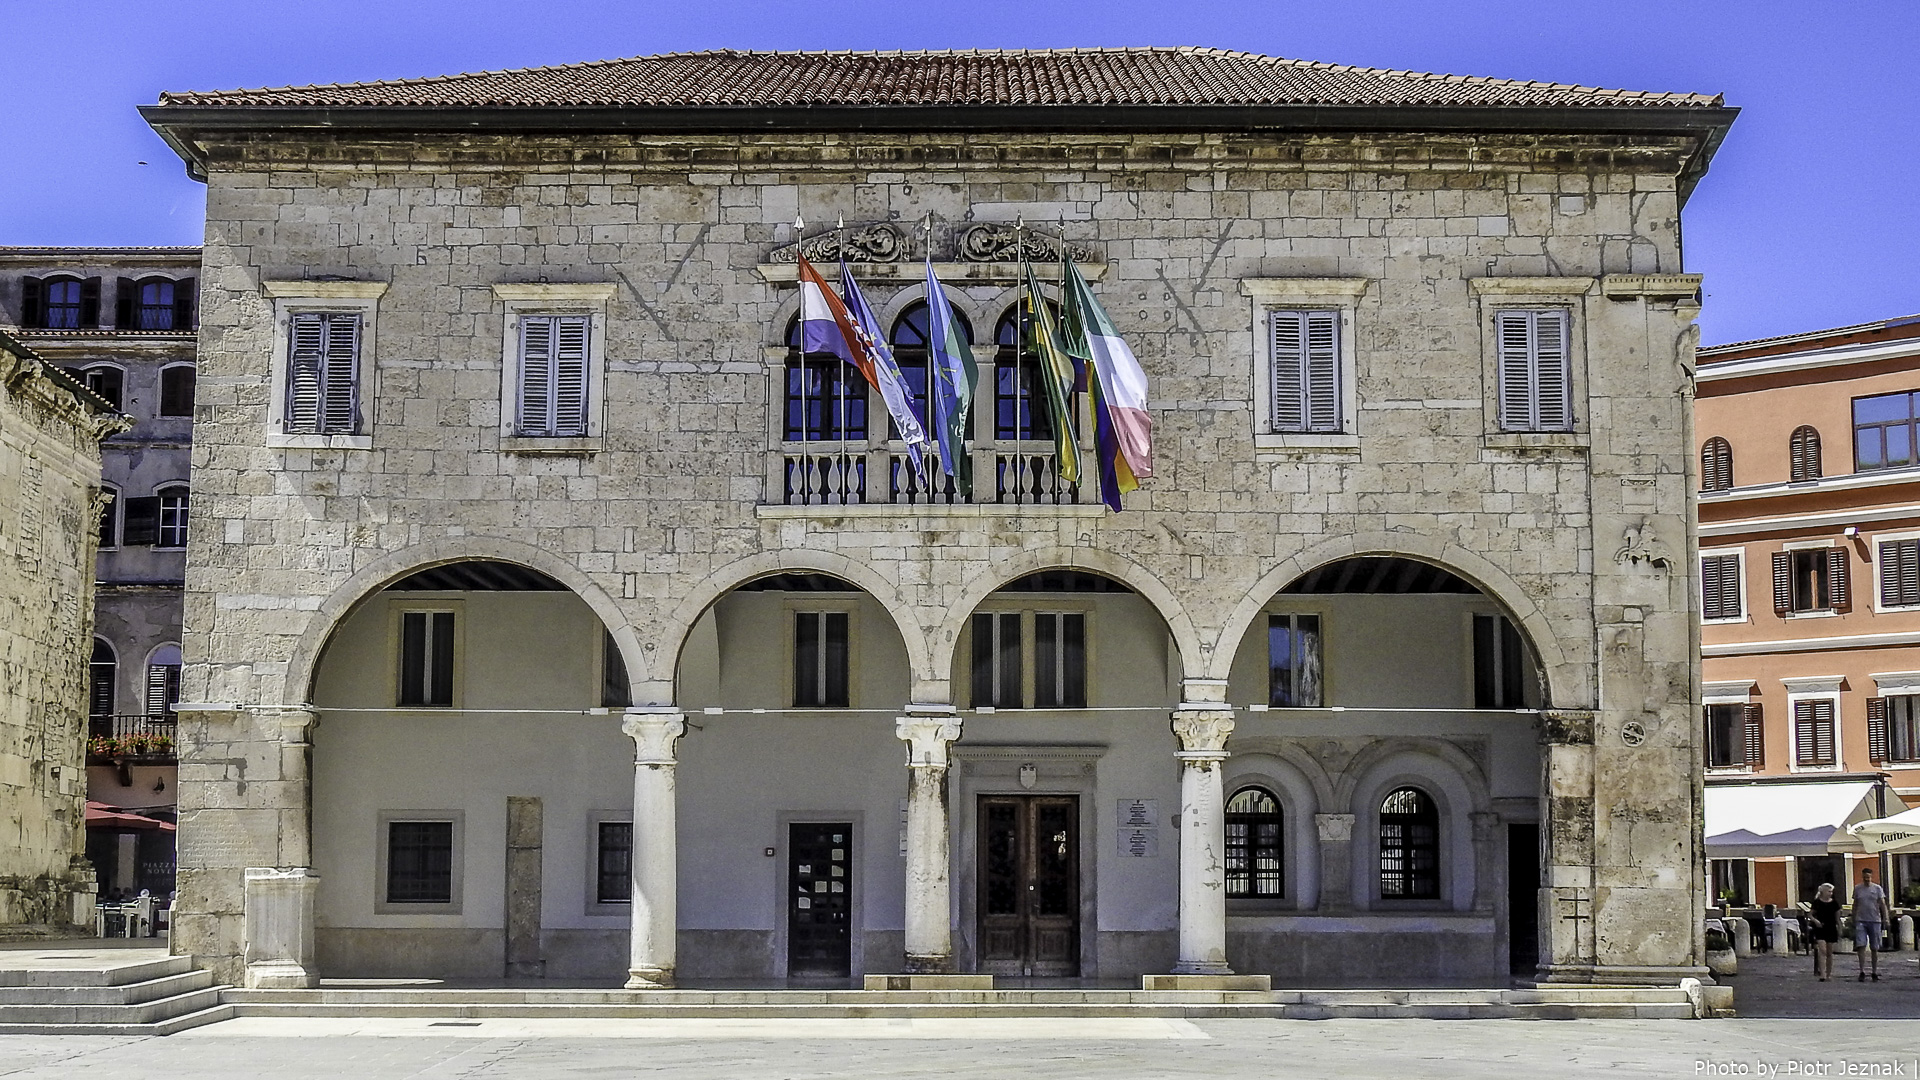 The Town Hall in Pula